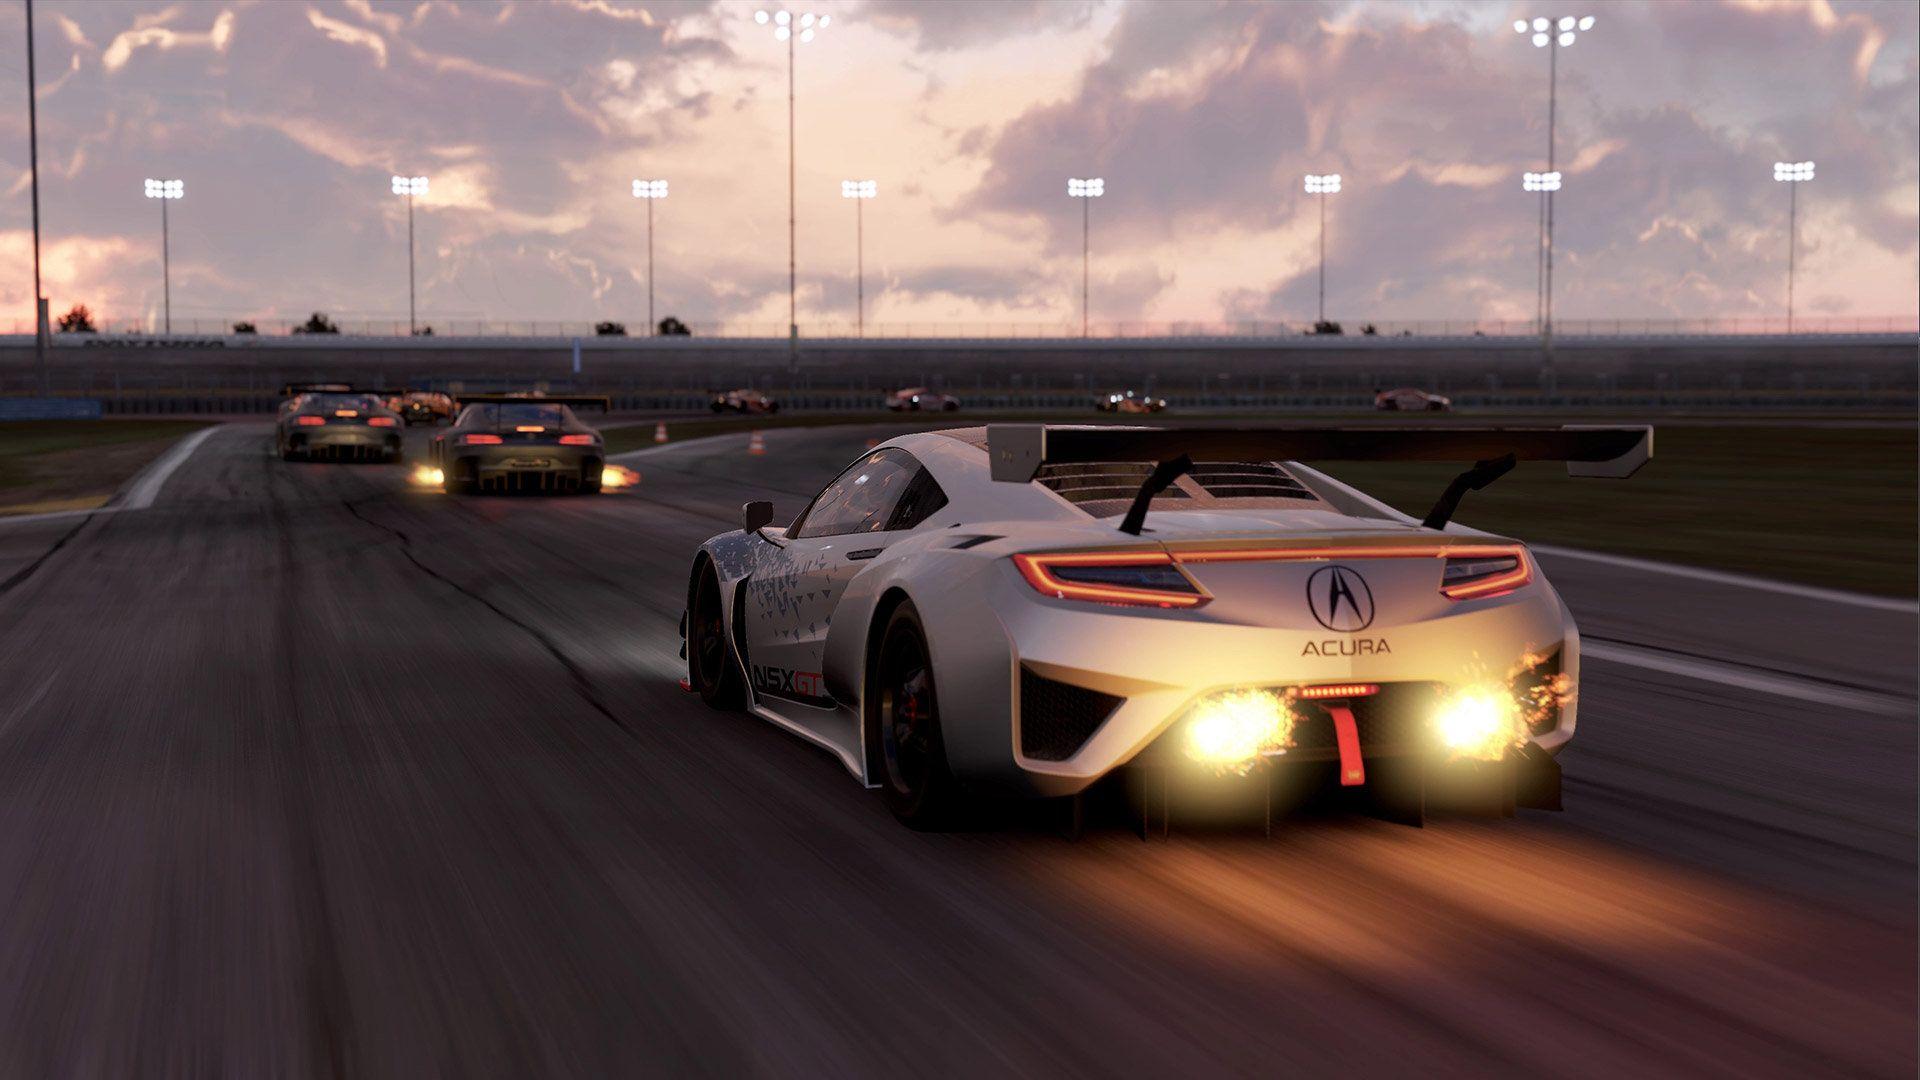 Project CARS 2 Features Over 180 Cars; Full List Revealed